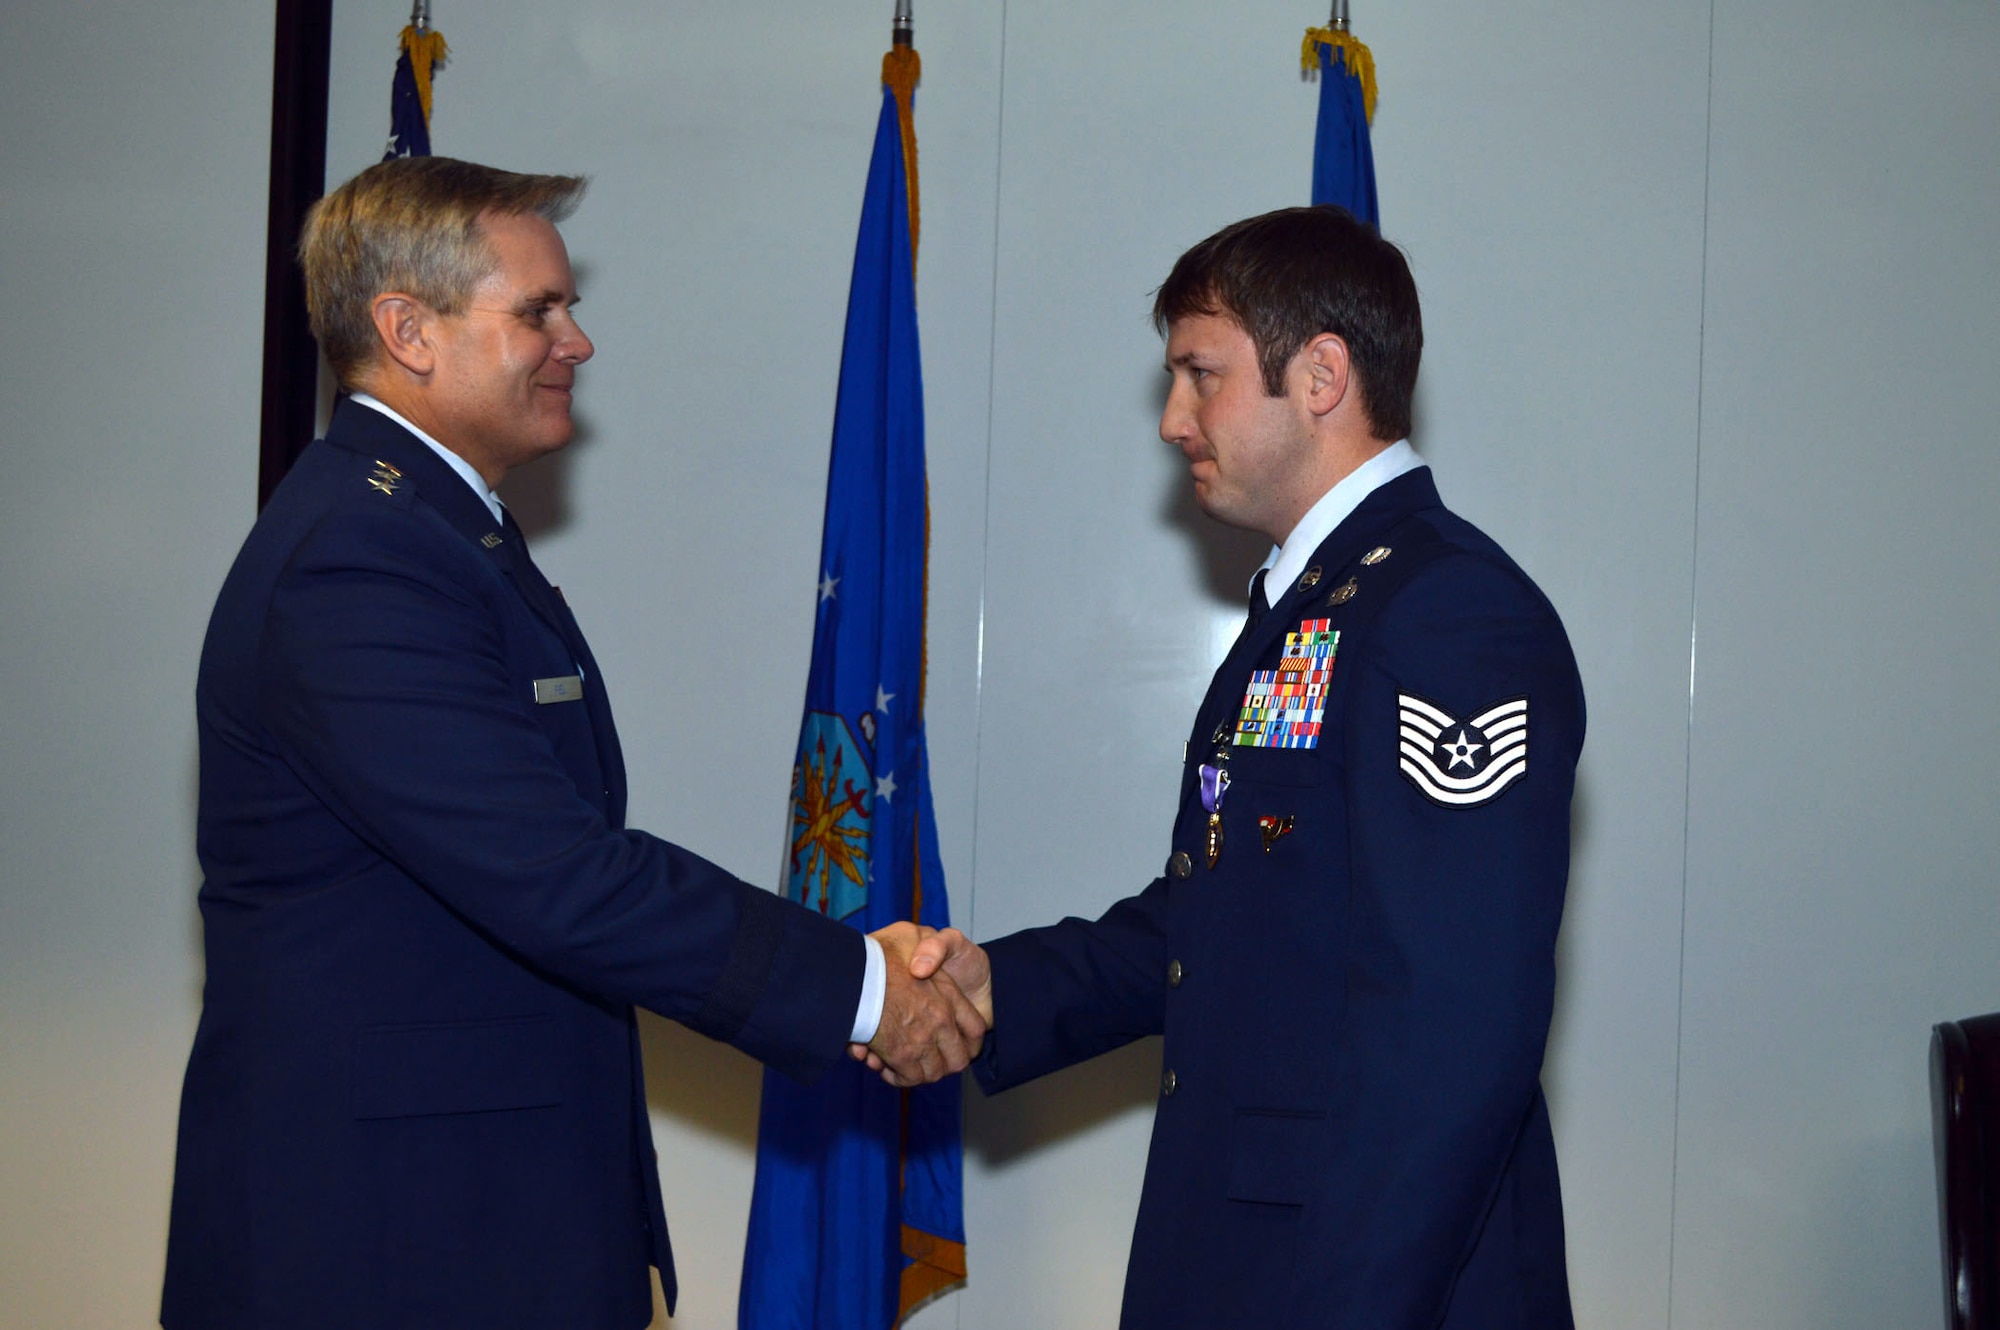 Lt. Gen. Eric Fiel, Air Force Special Operations Command commander, awards the Purple Heart medal to Tech. Sgt. Jeremy Whiddon, 21st Special Tactics Squadron, Jan. 10, 2014, at Pope Army Airfield, Fort Bragg, N.C., for wounds received in action on May 29, 2013. (U.S. Air Force photo by Marvin Krause)